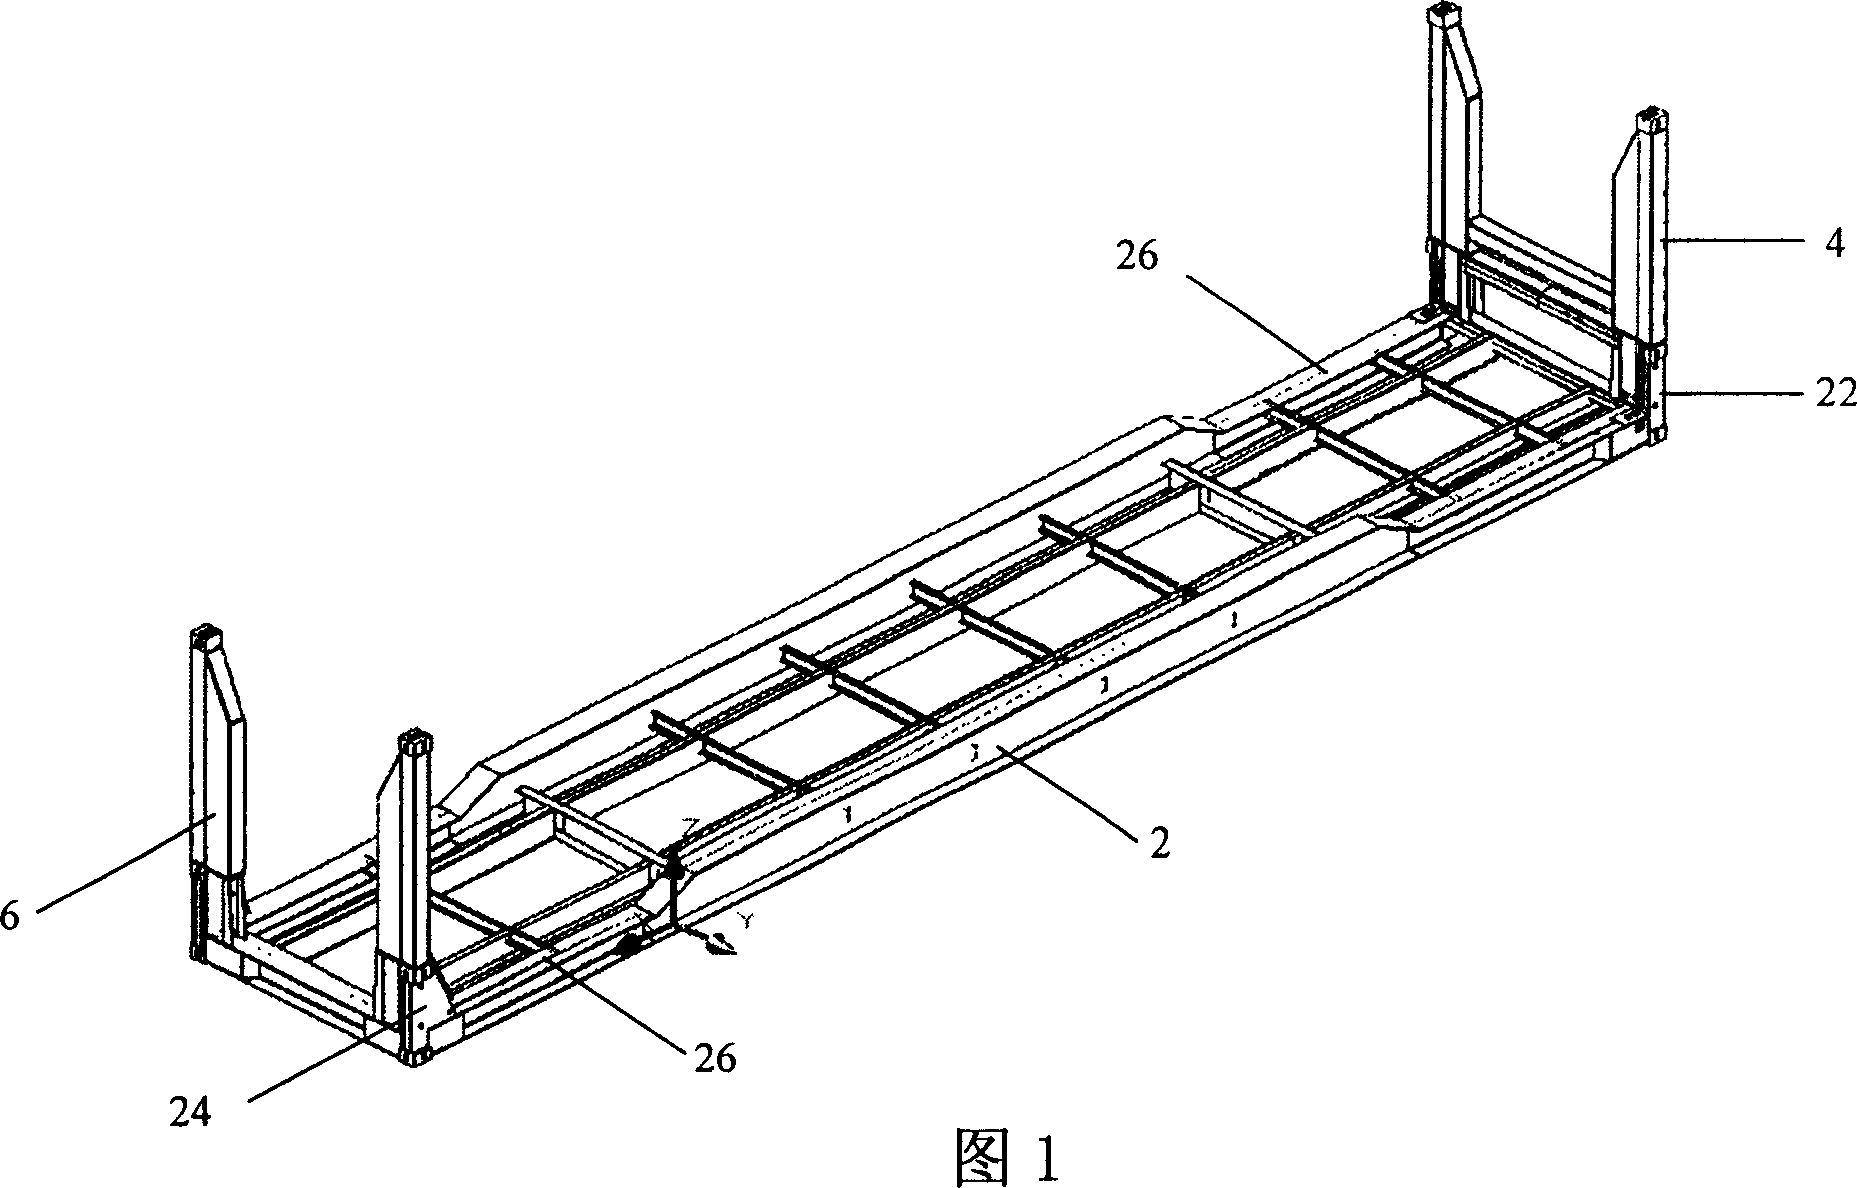 Foldable container for transporting semitrailer chassis